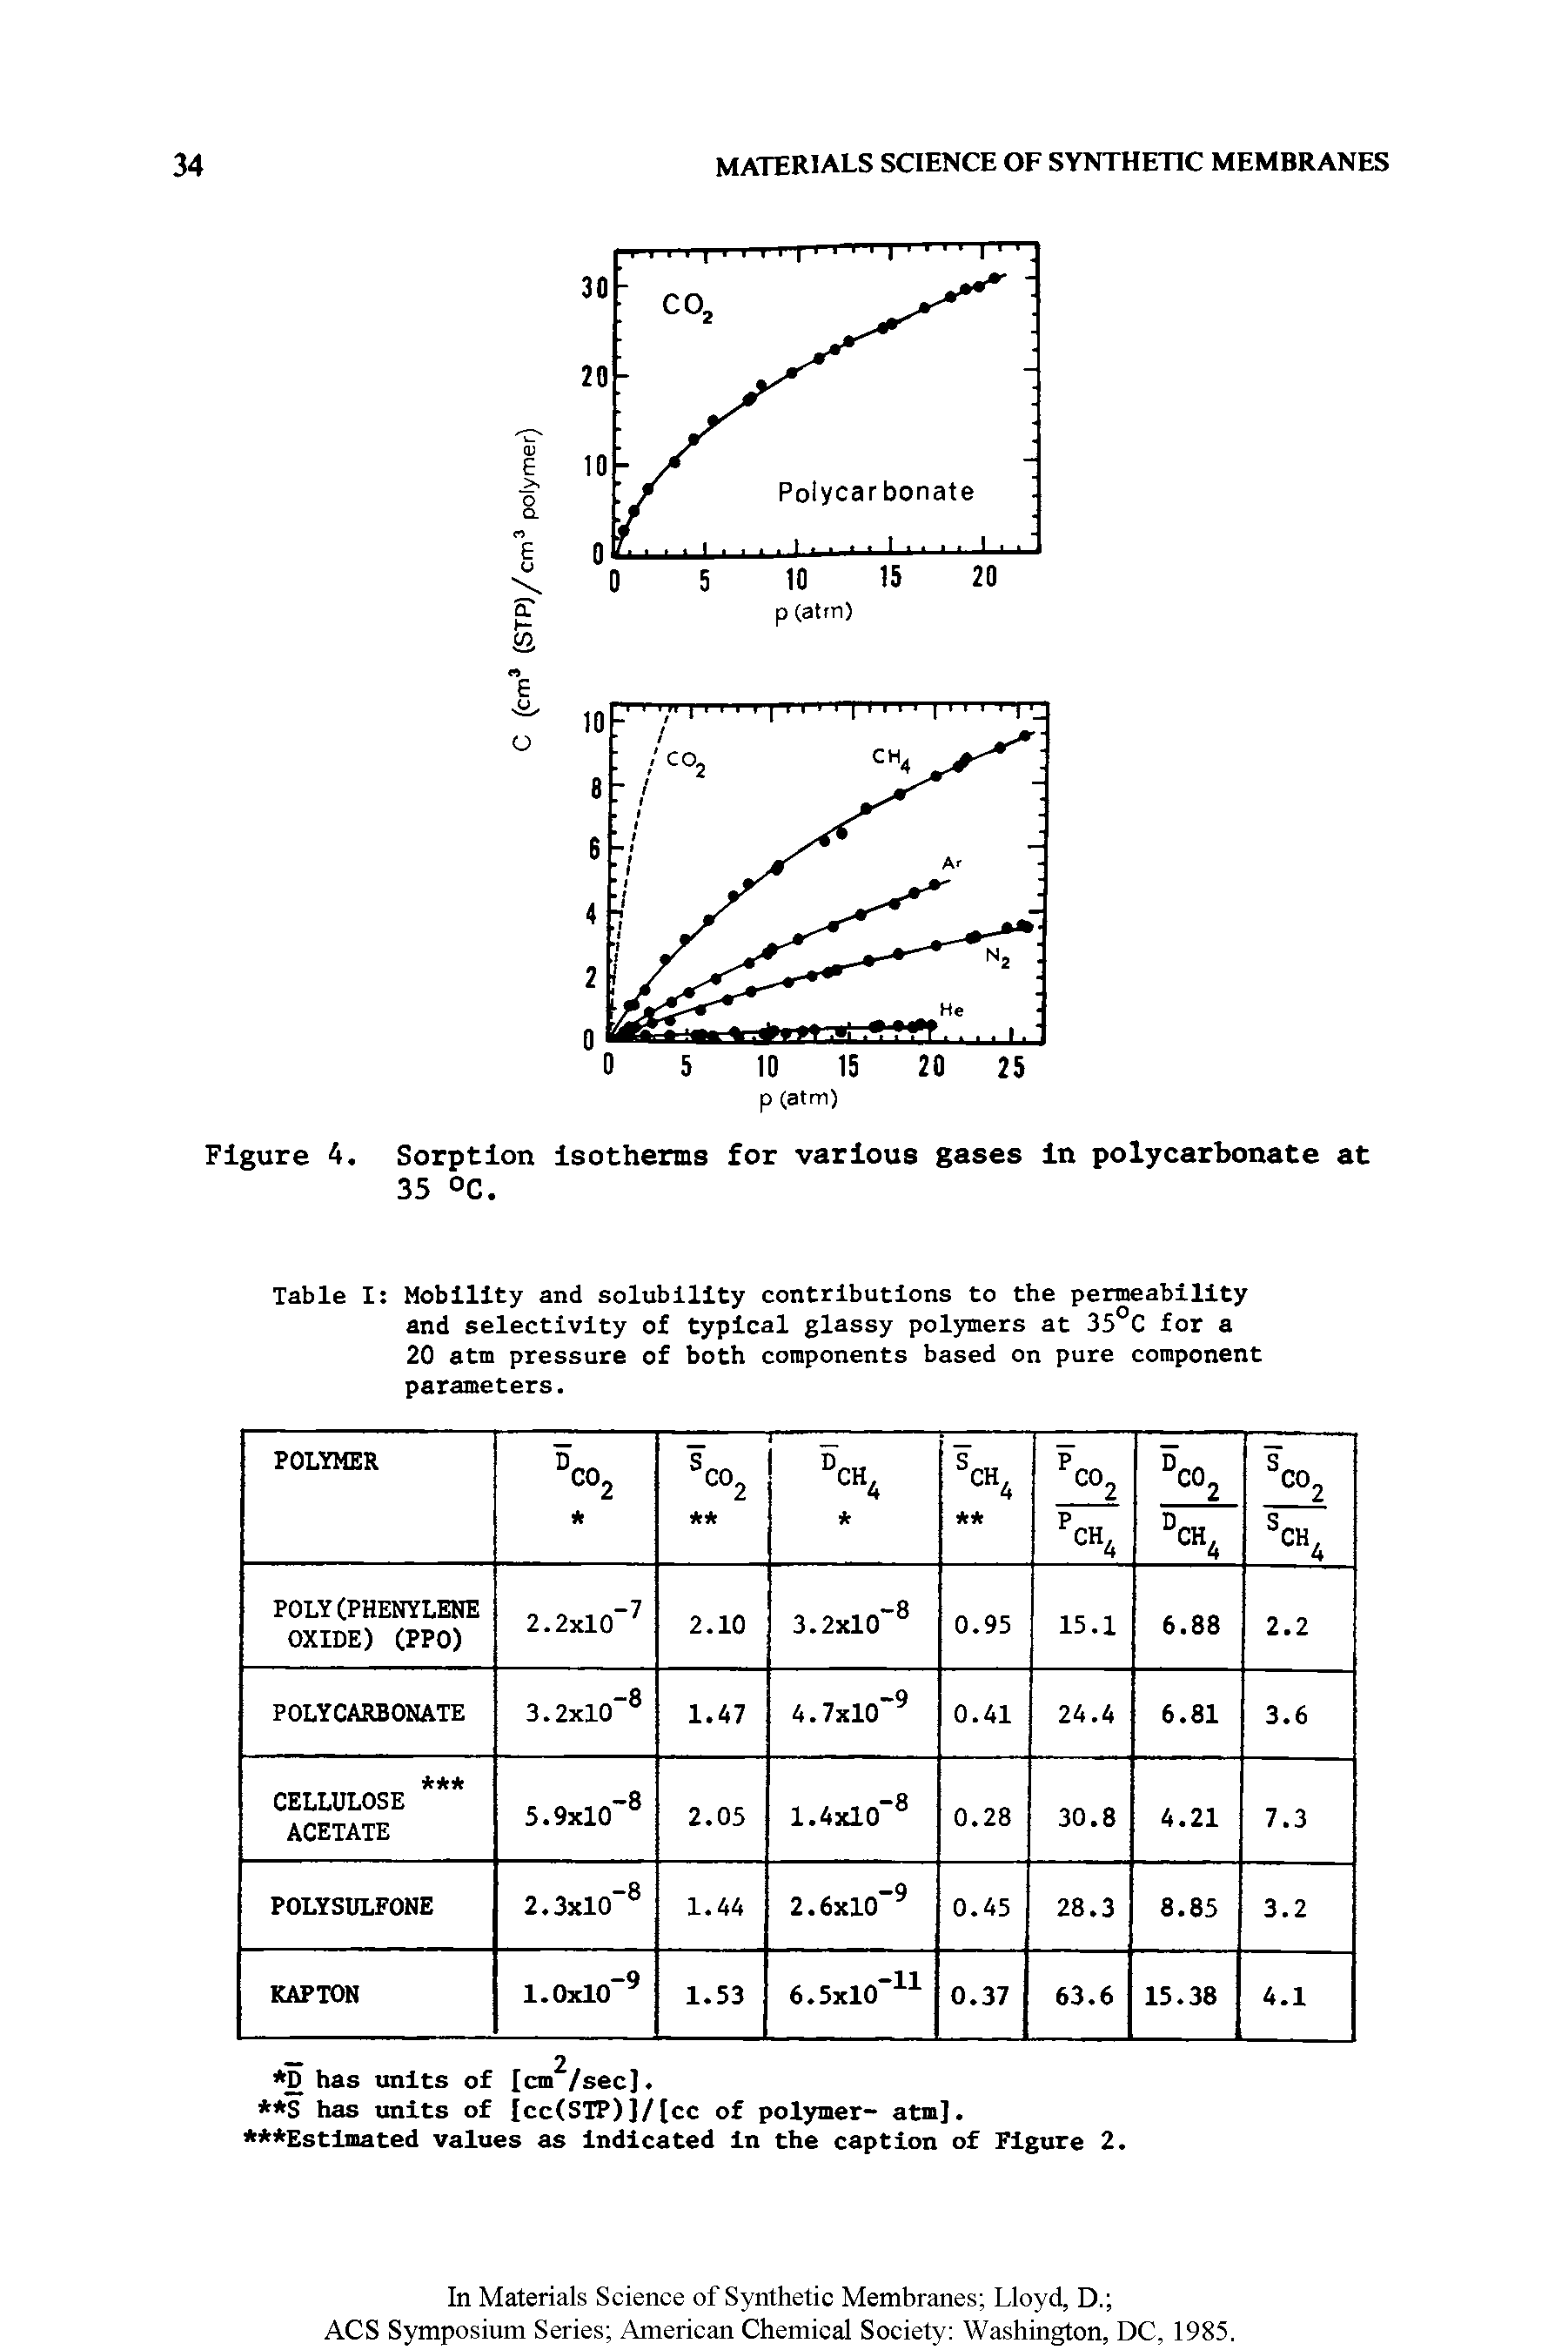 Table I Mobility and solubility contributions to the permeability and selectivity of typical glassy polymers at 35°C for a 20 atm pressure of both components based on pure component parameters.